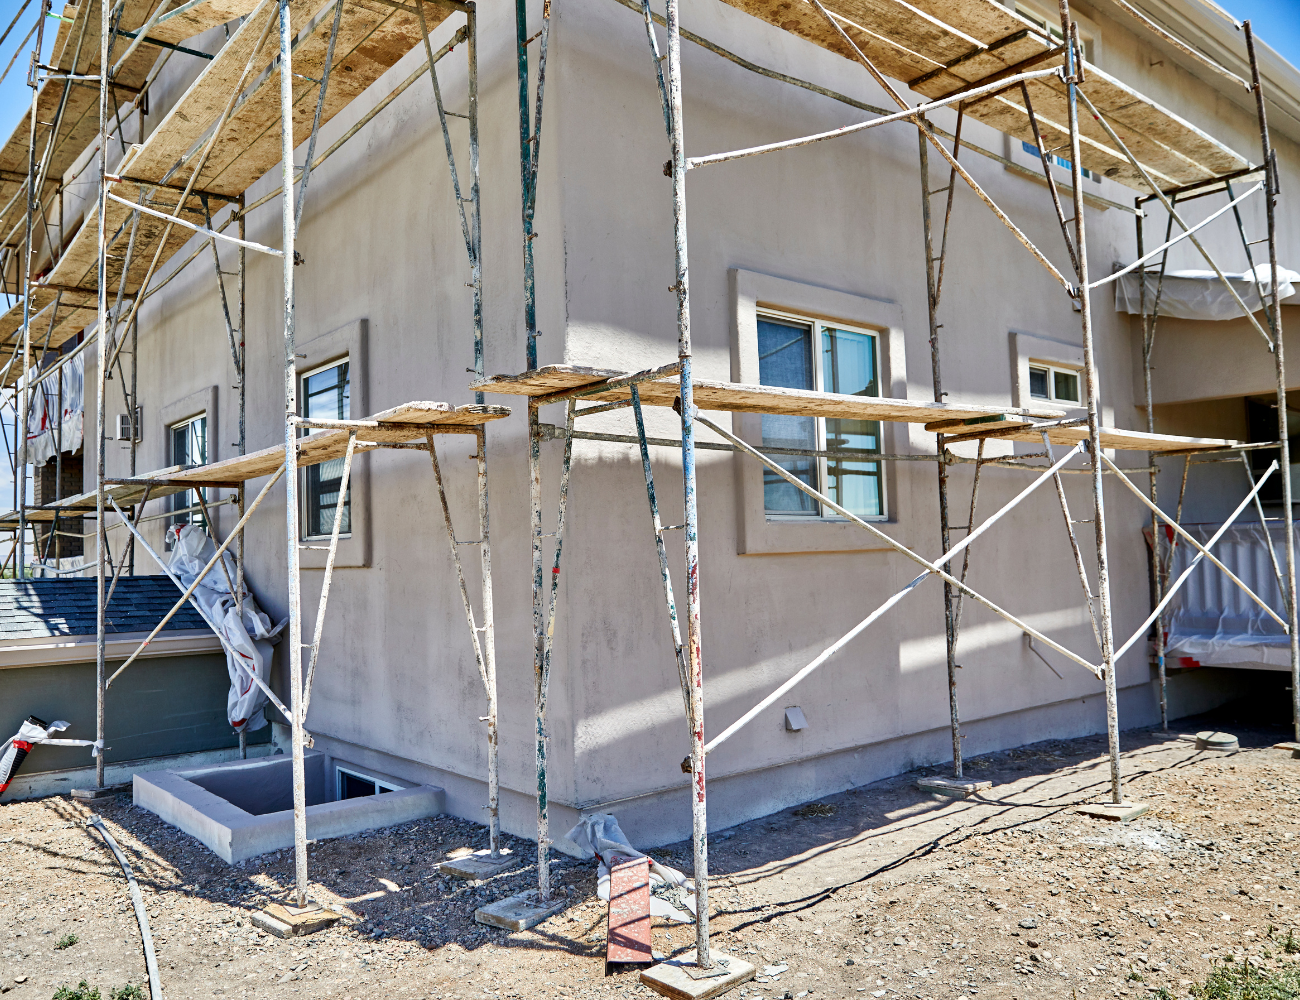 G. Fedale Stucco Remediation Services